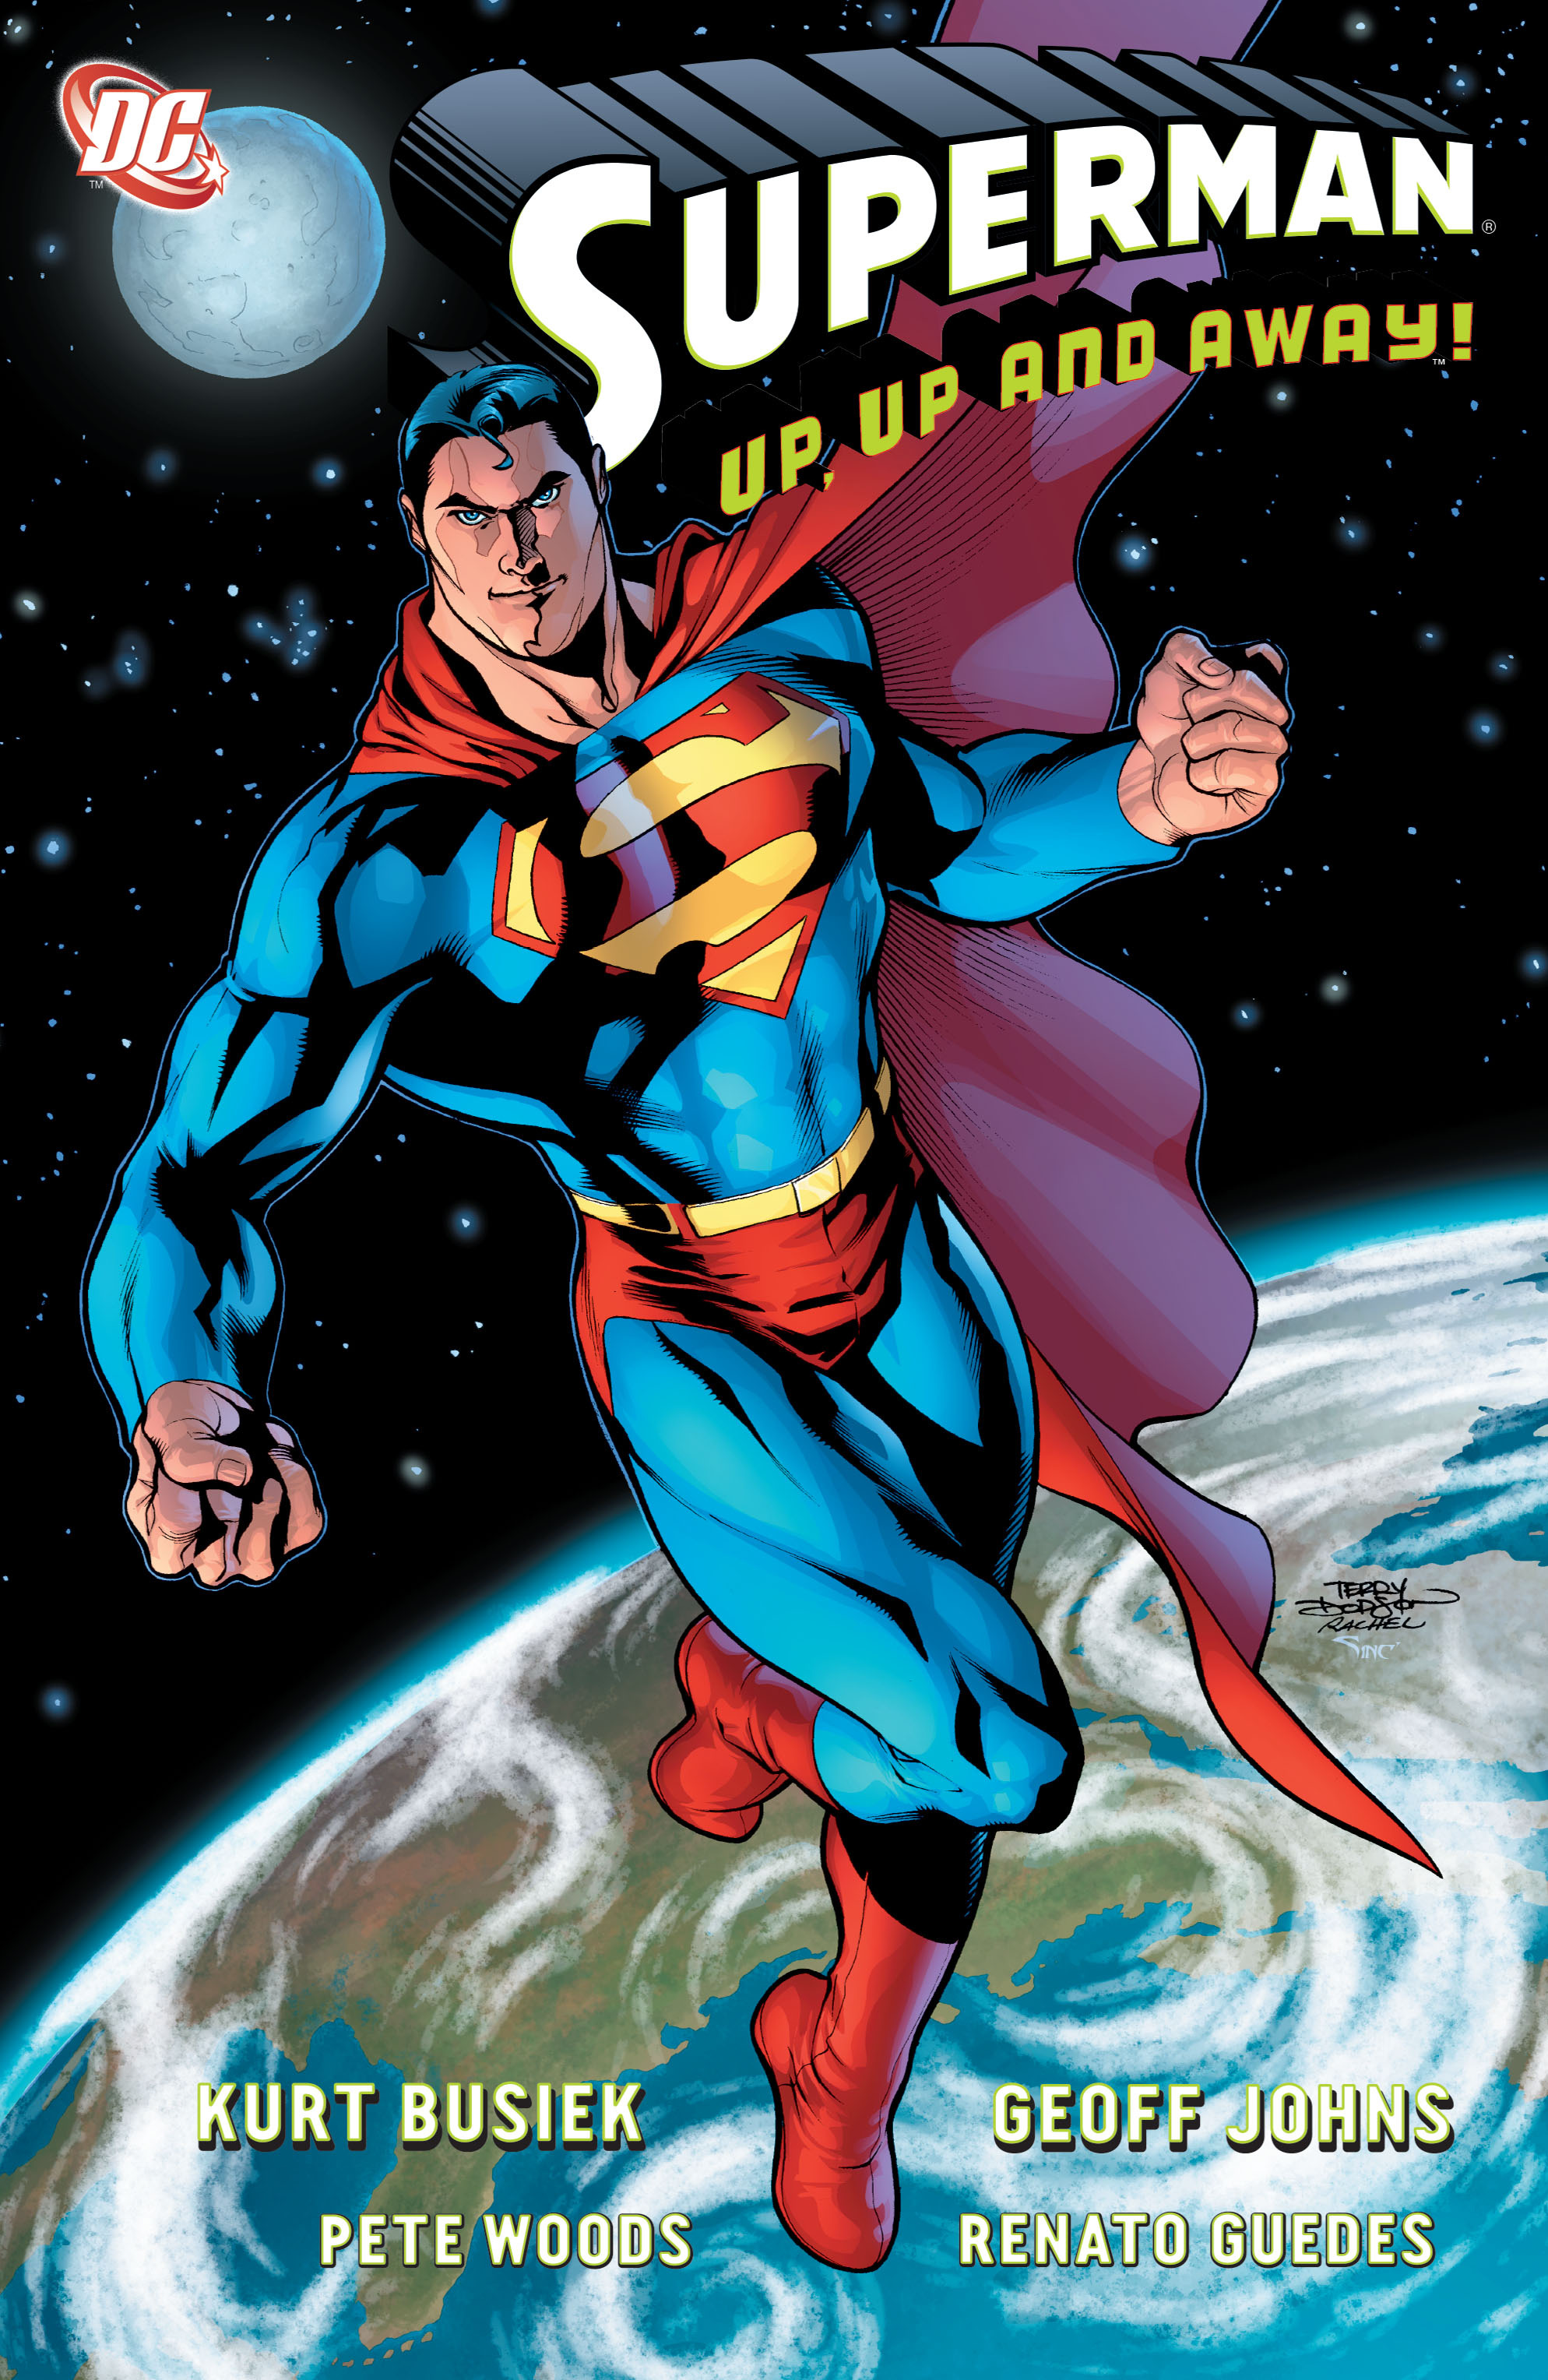 Read online Superman: Up, Up and Away! comic -  Issue # Full - 1